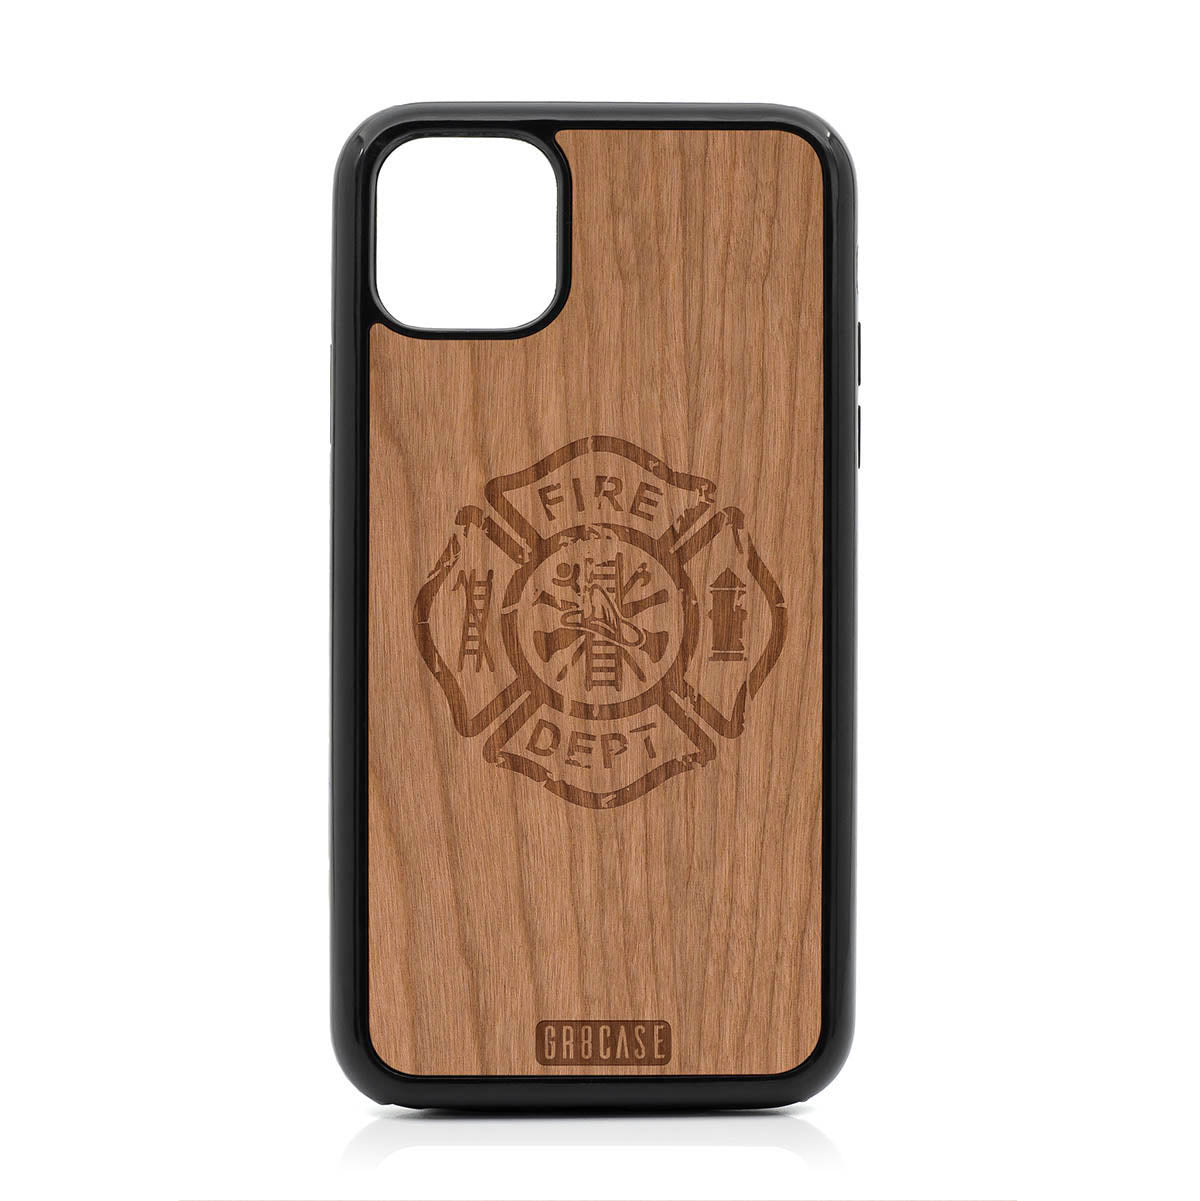 Fire Department Design Wood Case For iPhone 11 Pro Max by GR8CASE